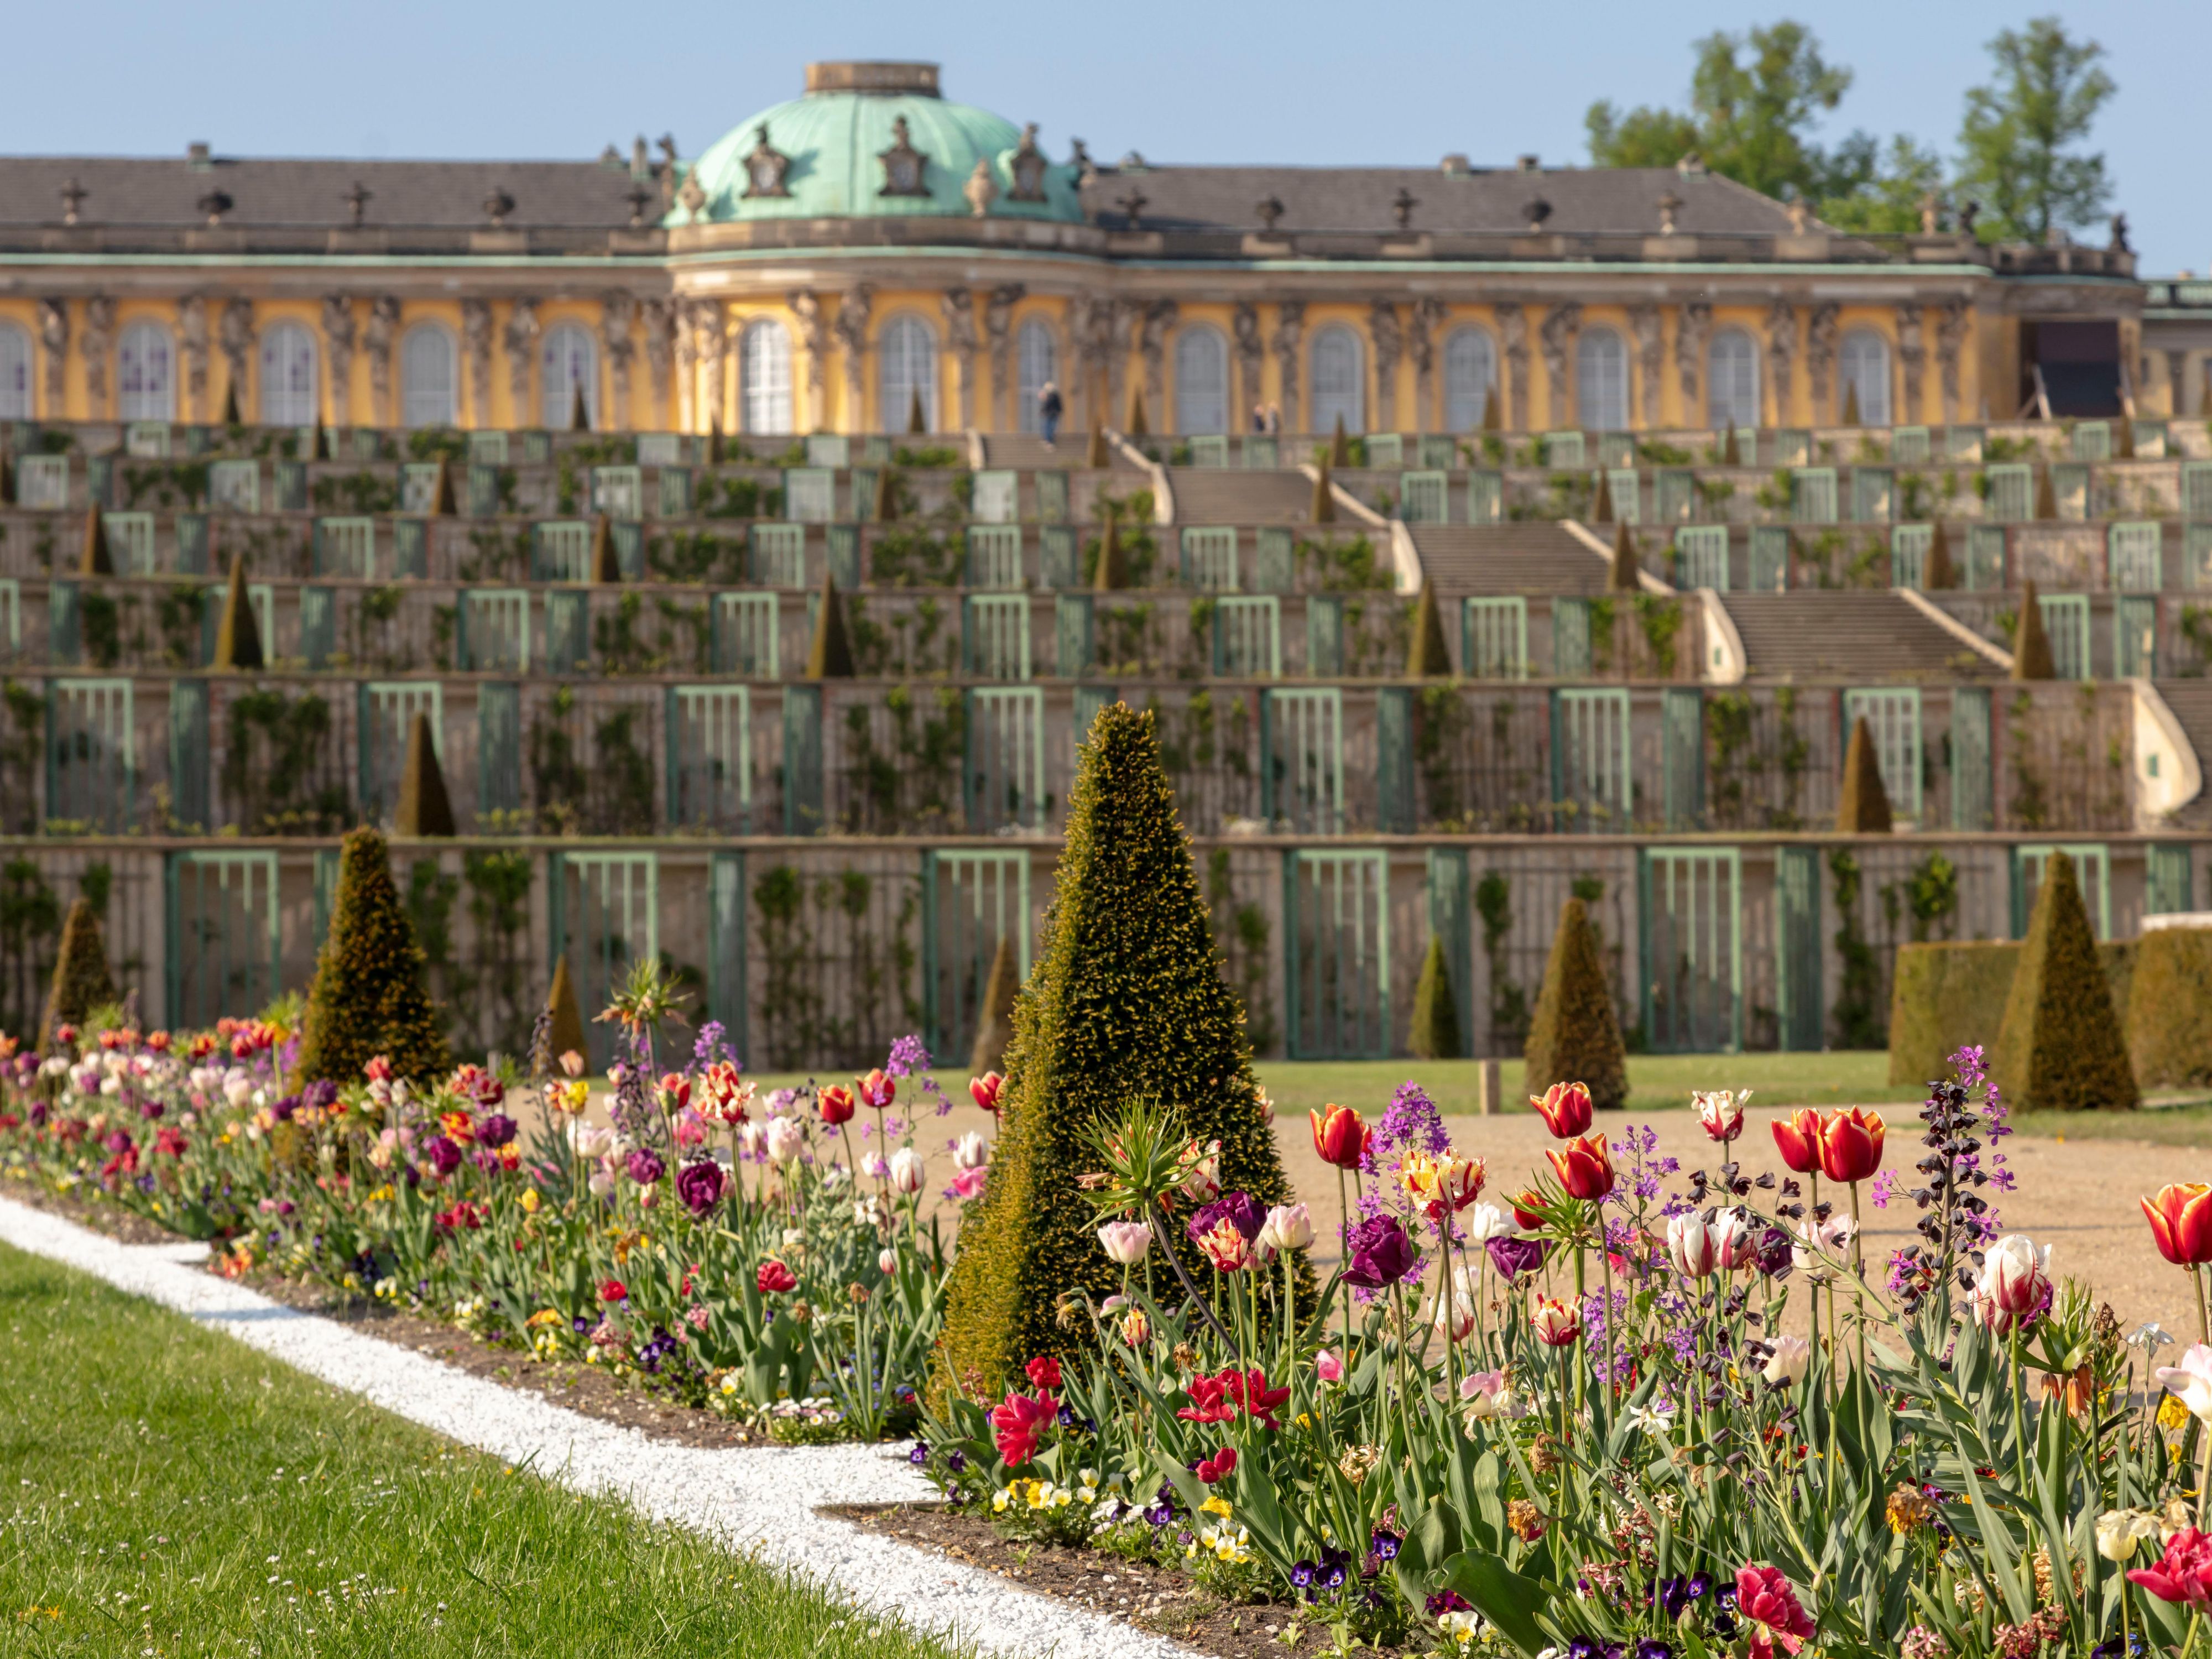 Book your Stay and Discover Potsdam